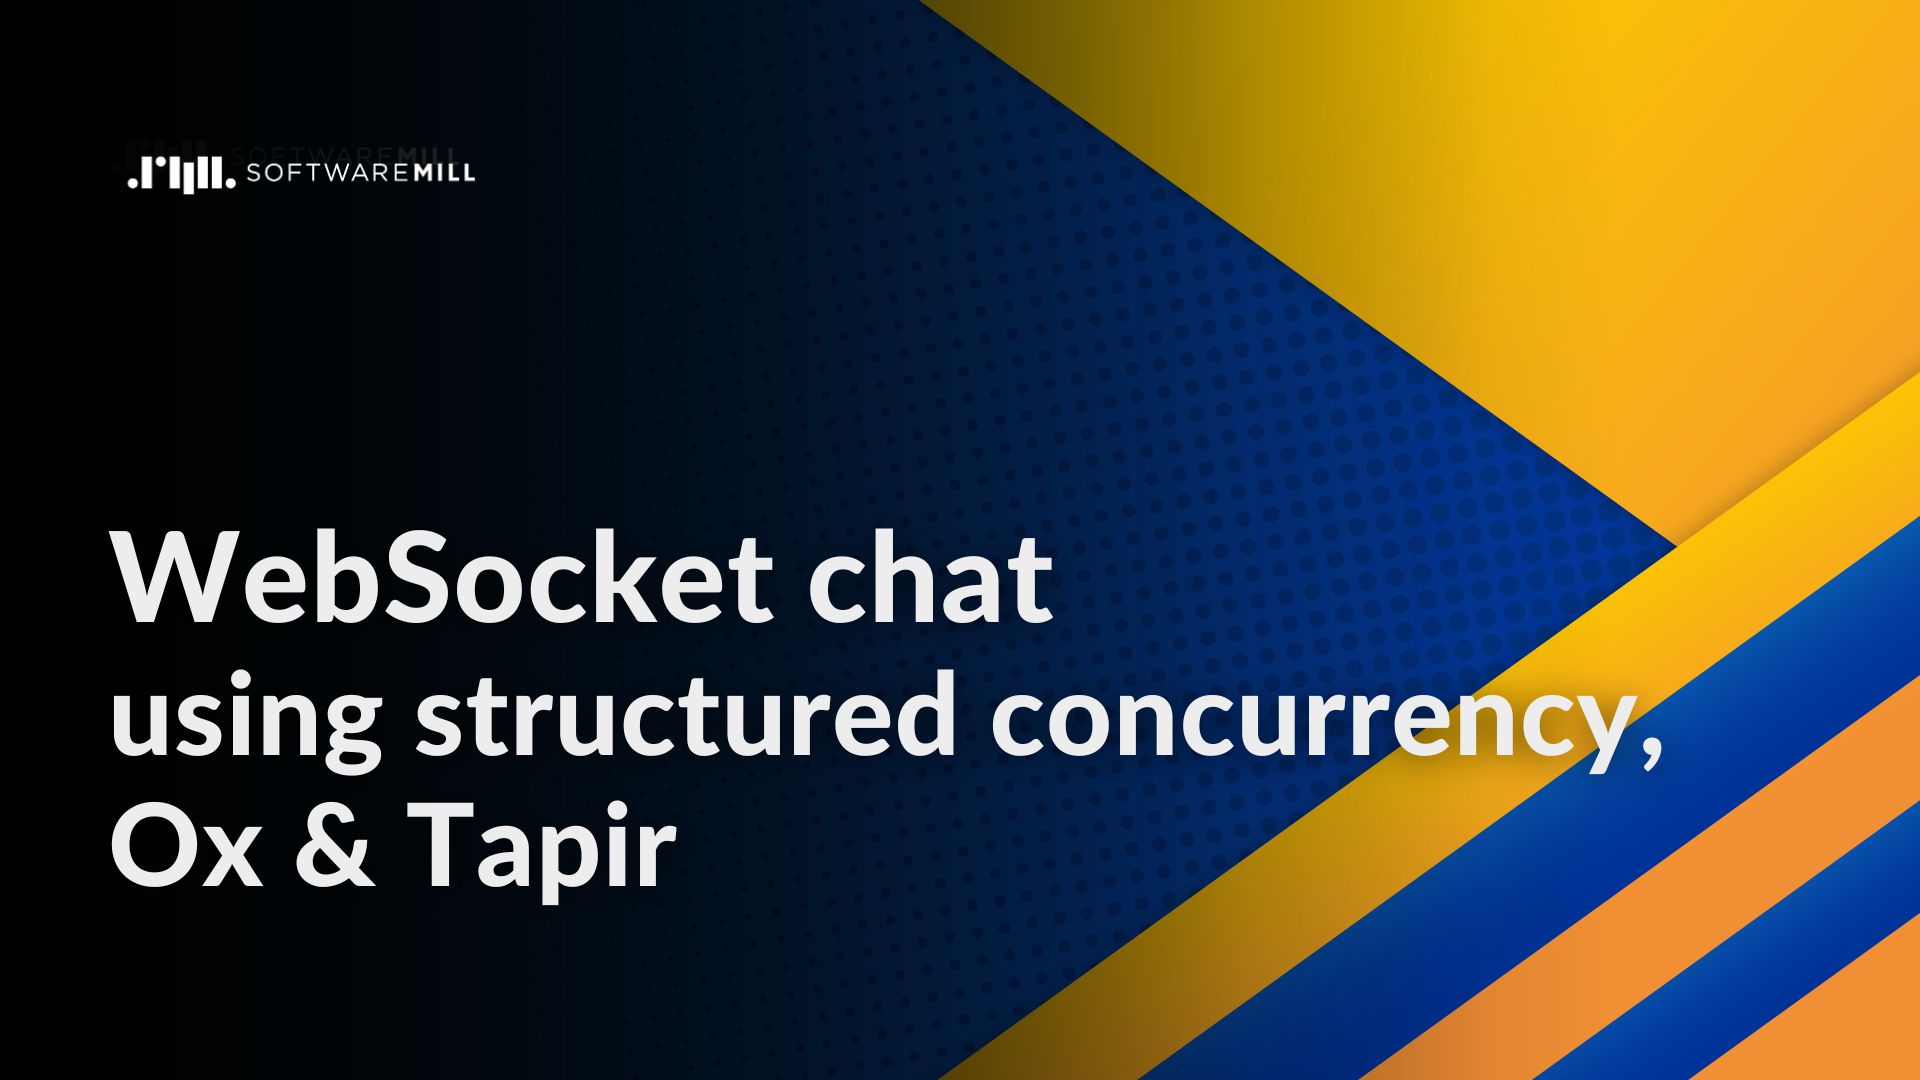 WebSocket chat using structured concurrency, Ox & Tapir webp image